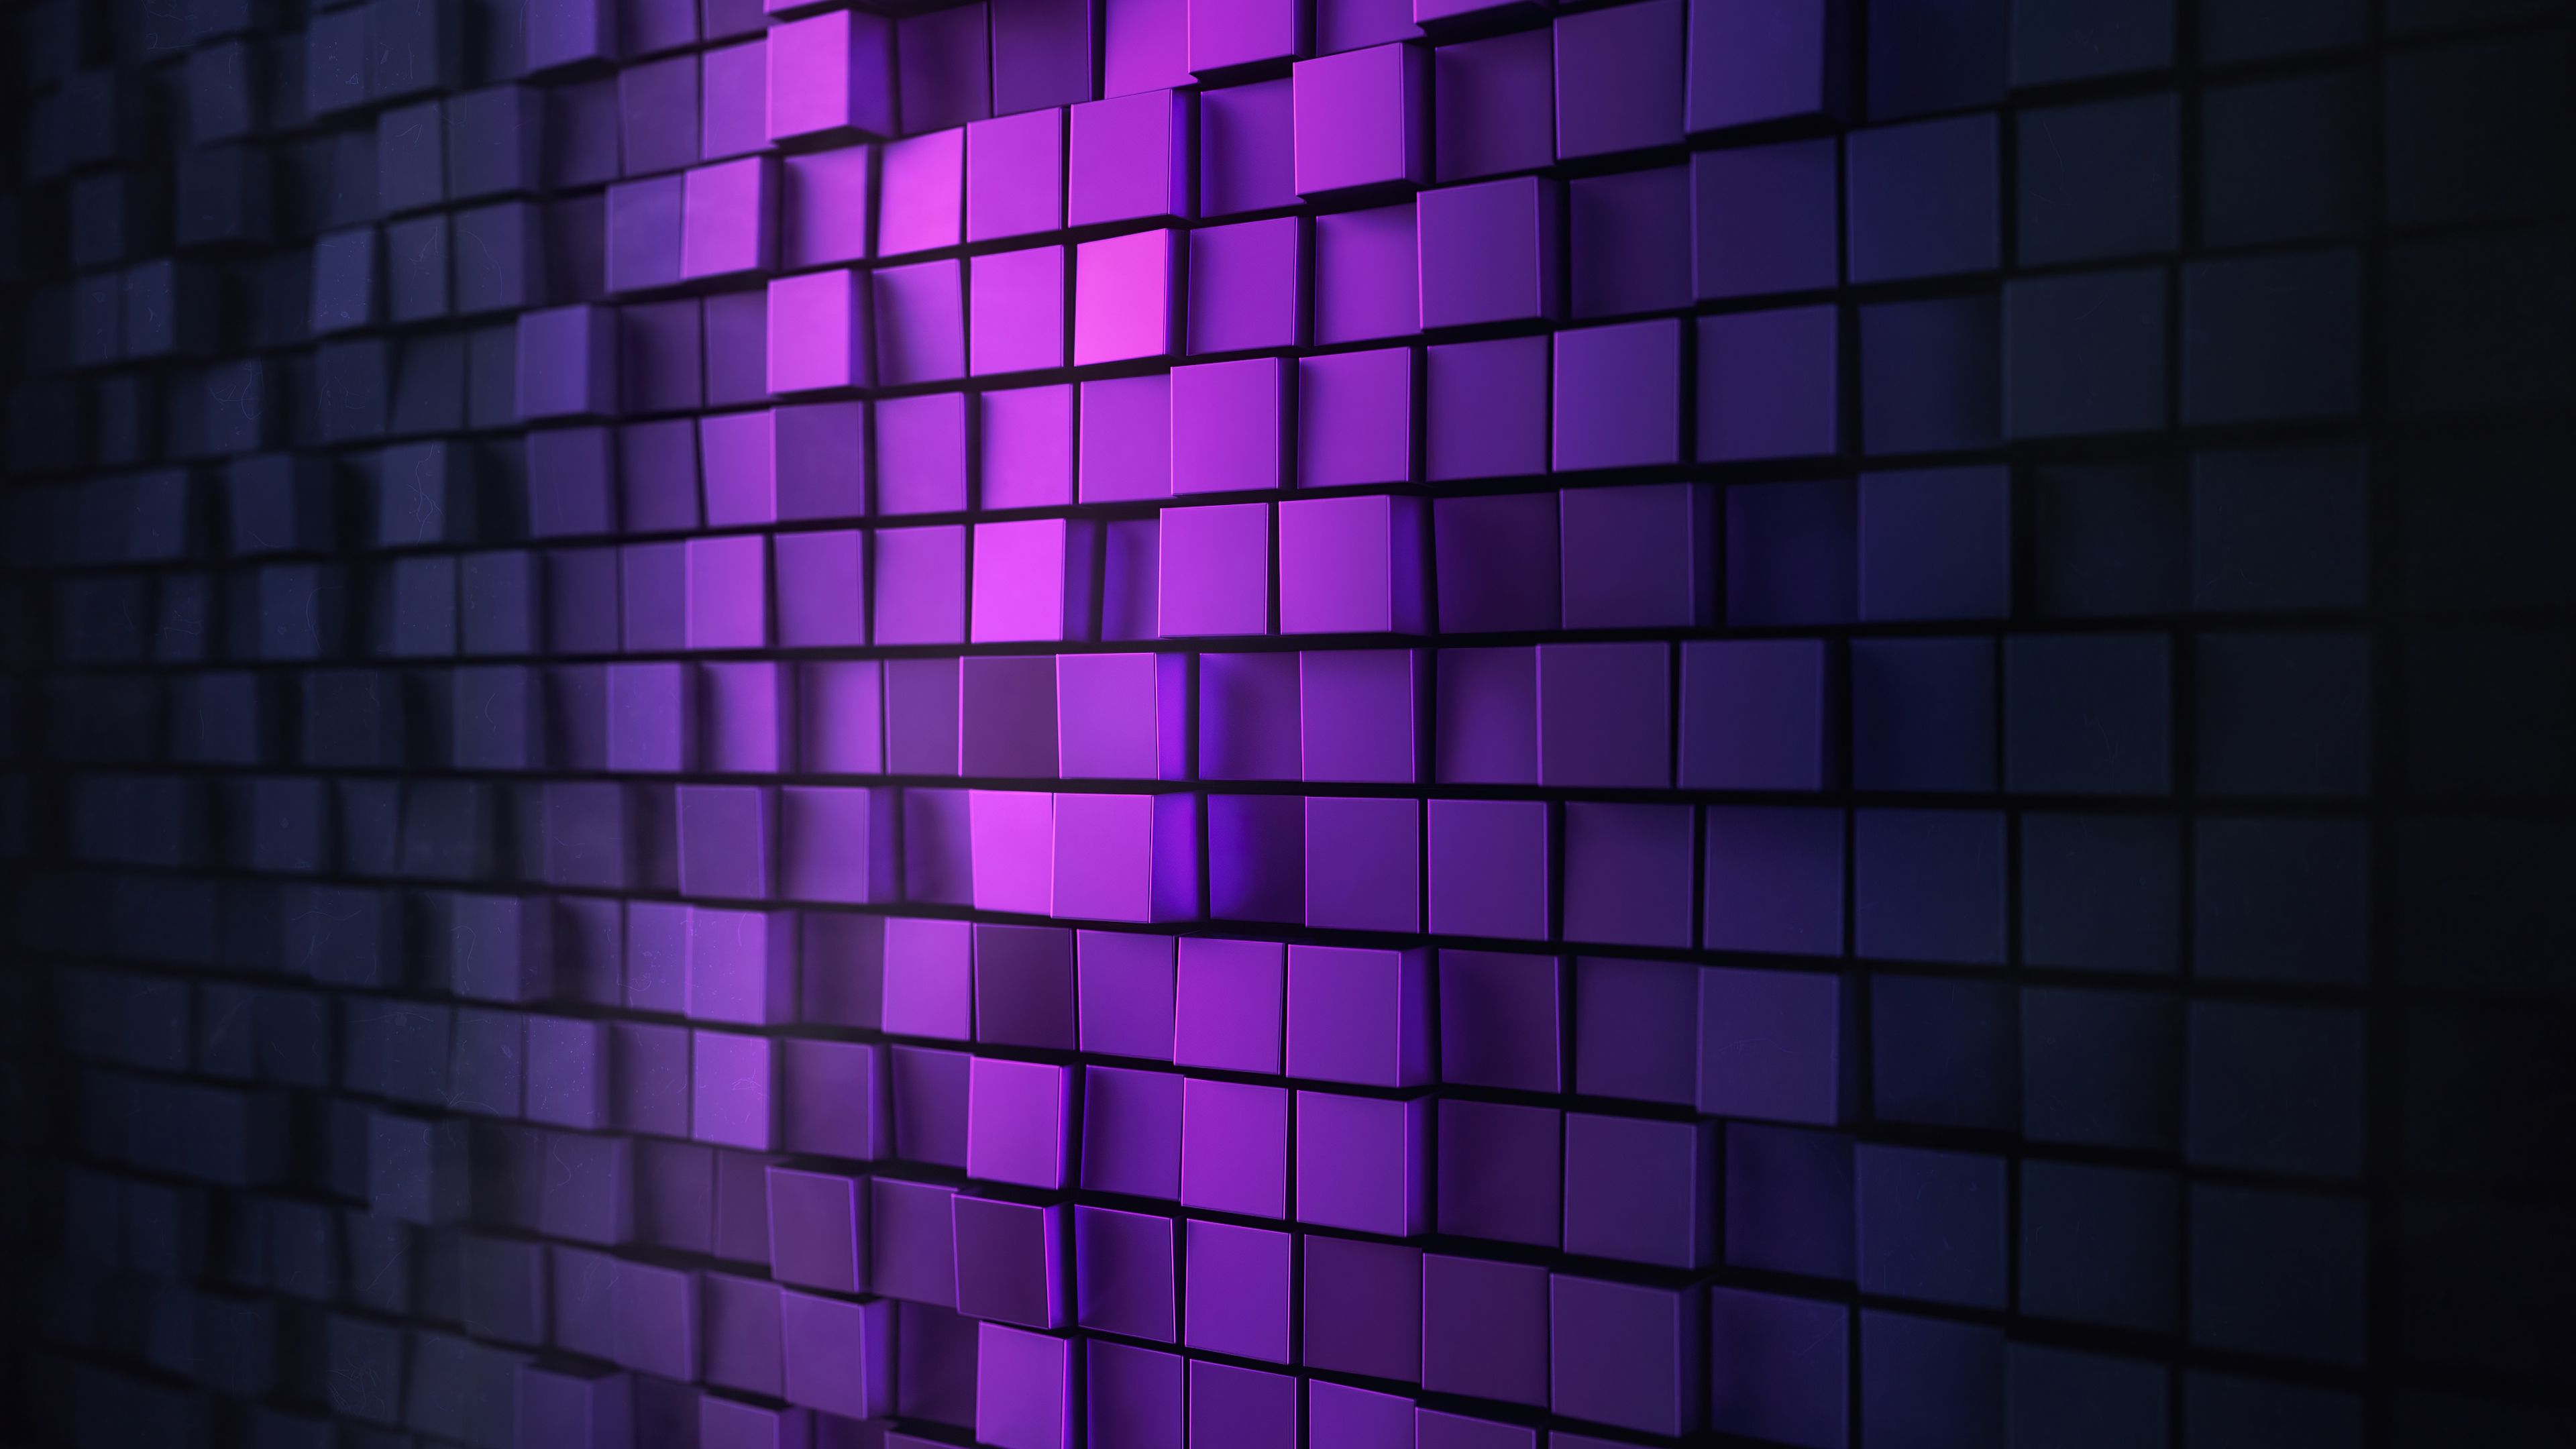 A wall of purple cubes with a black background - 3840x2160